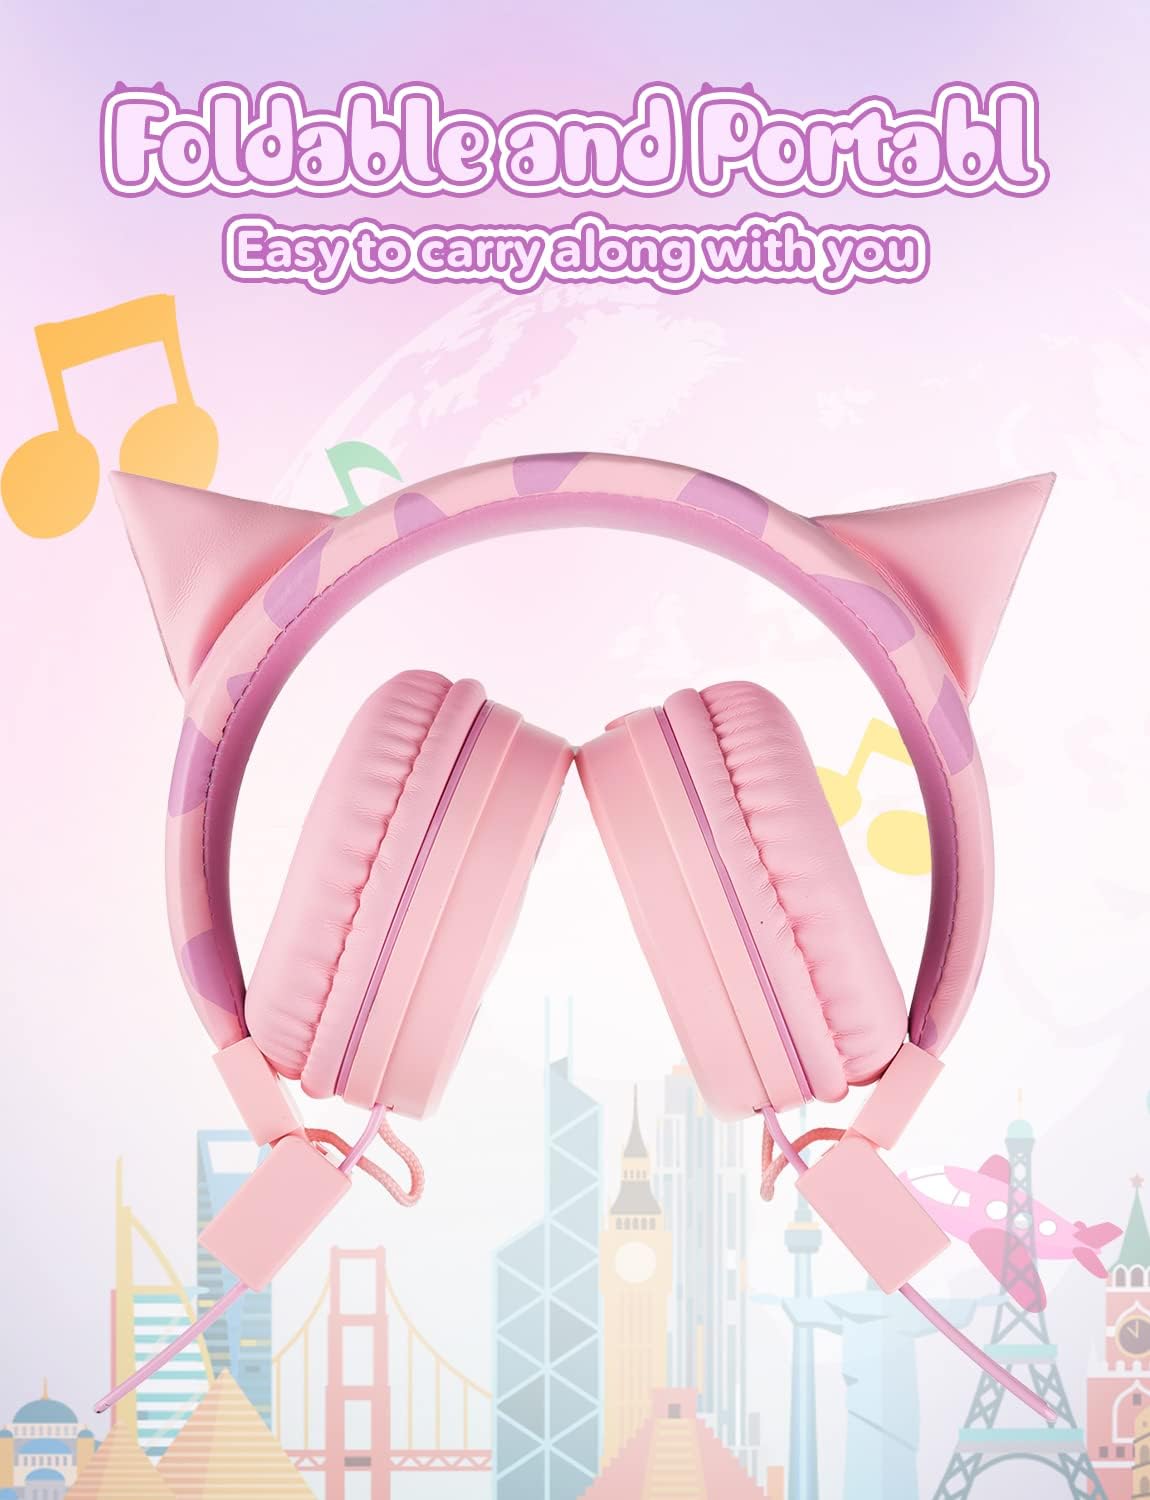 SIMJAR Cat Ear Kids Headphones with Microphone for School, Volume Limiter 85/94dB, Wired Girls Headphones with Foldable Design for Online Learning/Travel/Tablet/iPad (Pink)